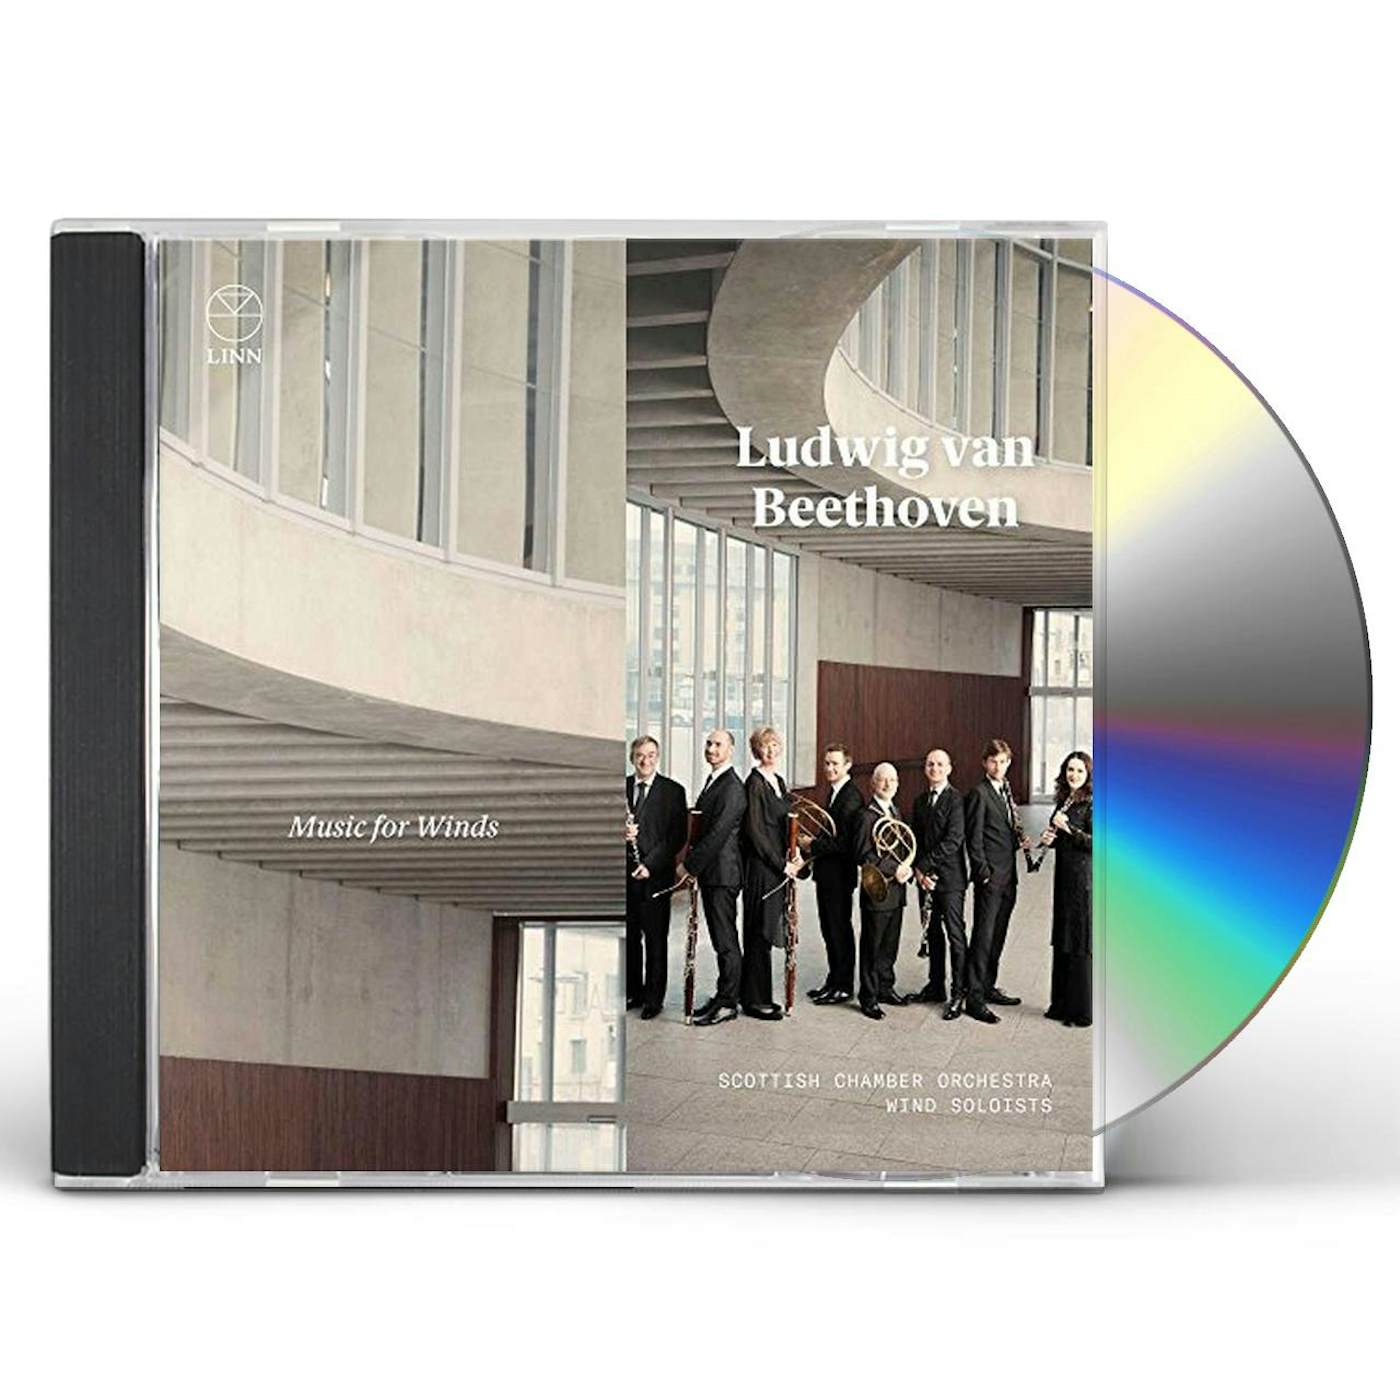 Ludwig van Beethoven MUSIC FOR WINDS CD